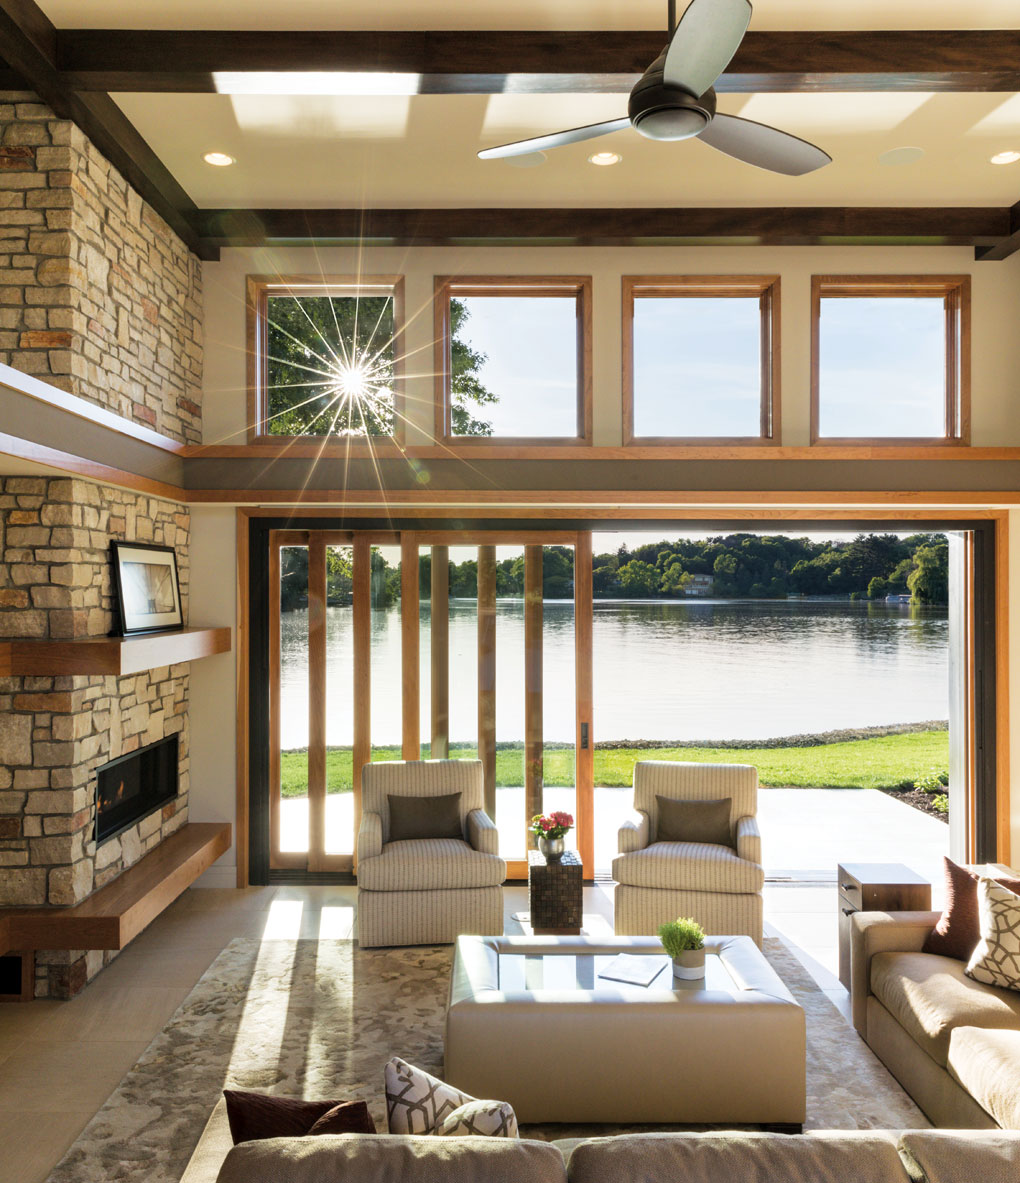 A living room with a large glass door and windows opens up to a view of the river.